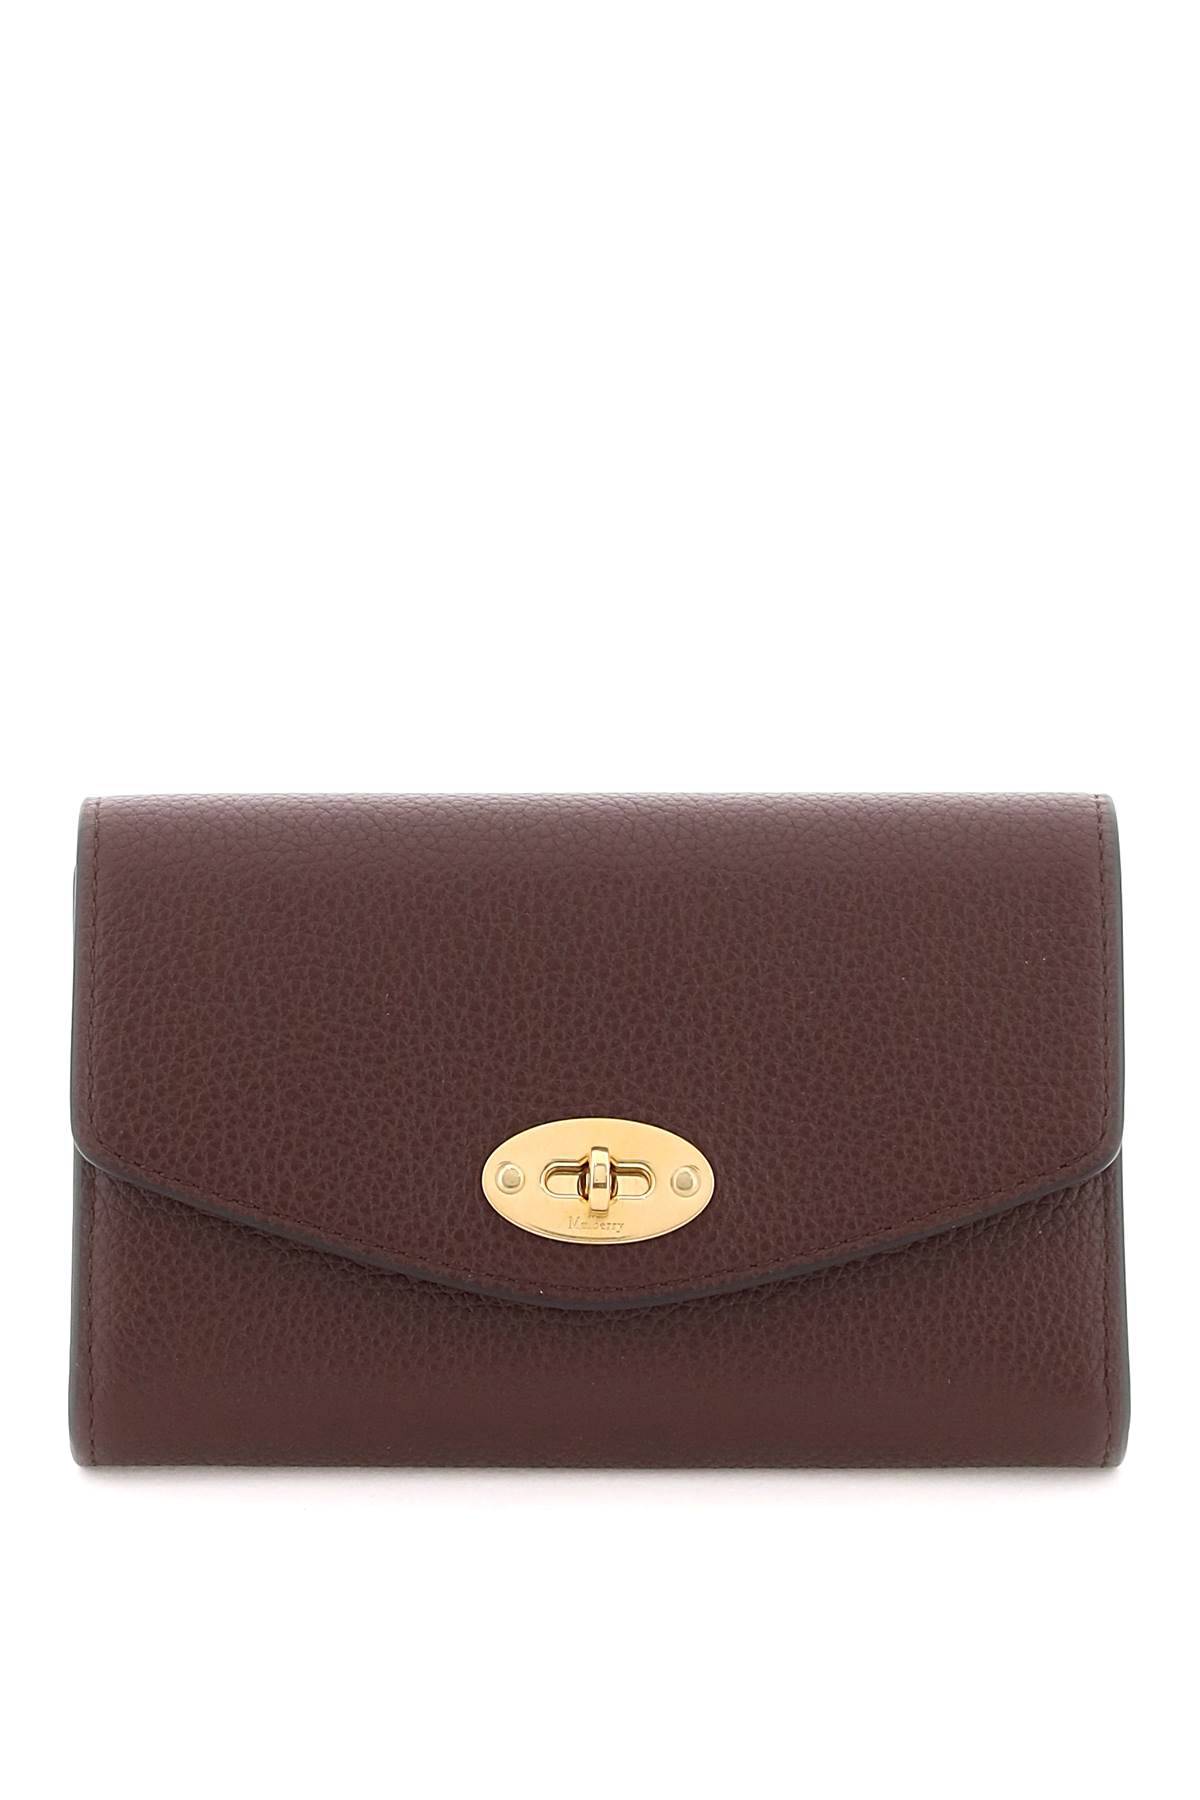 Mulberry MULBERRY darley wallet